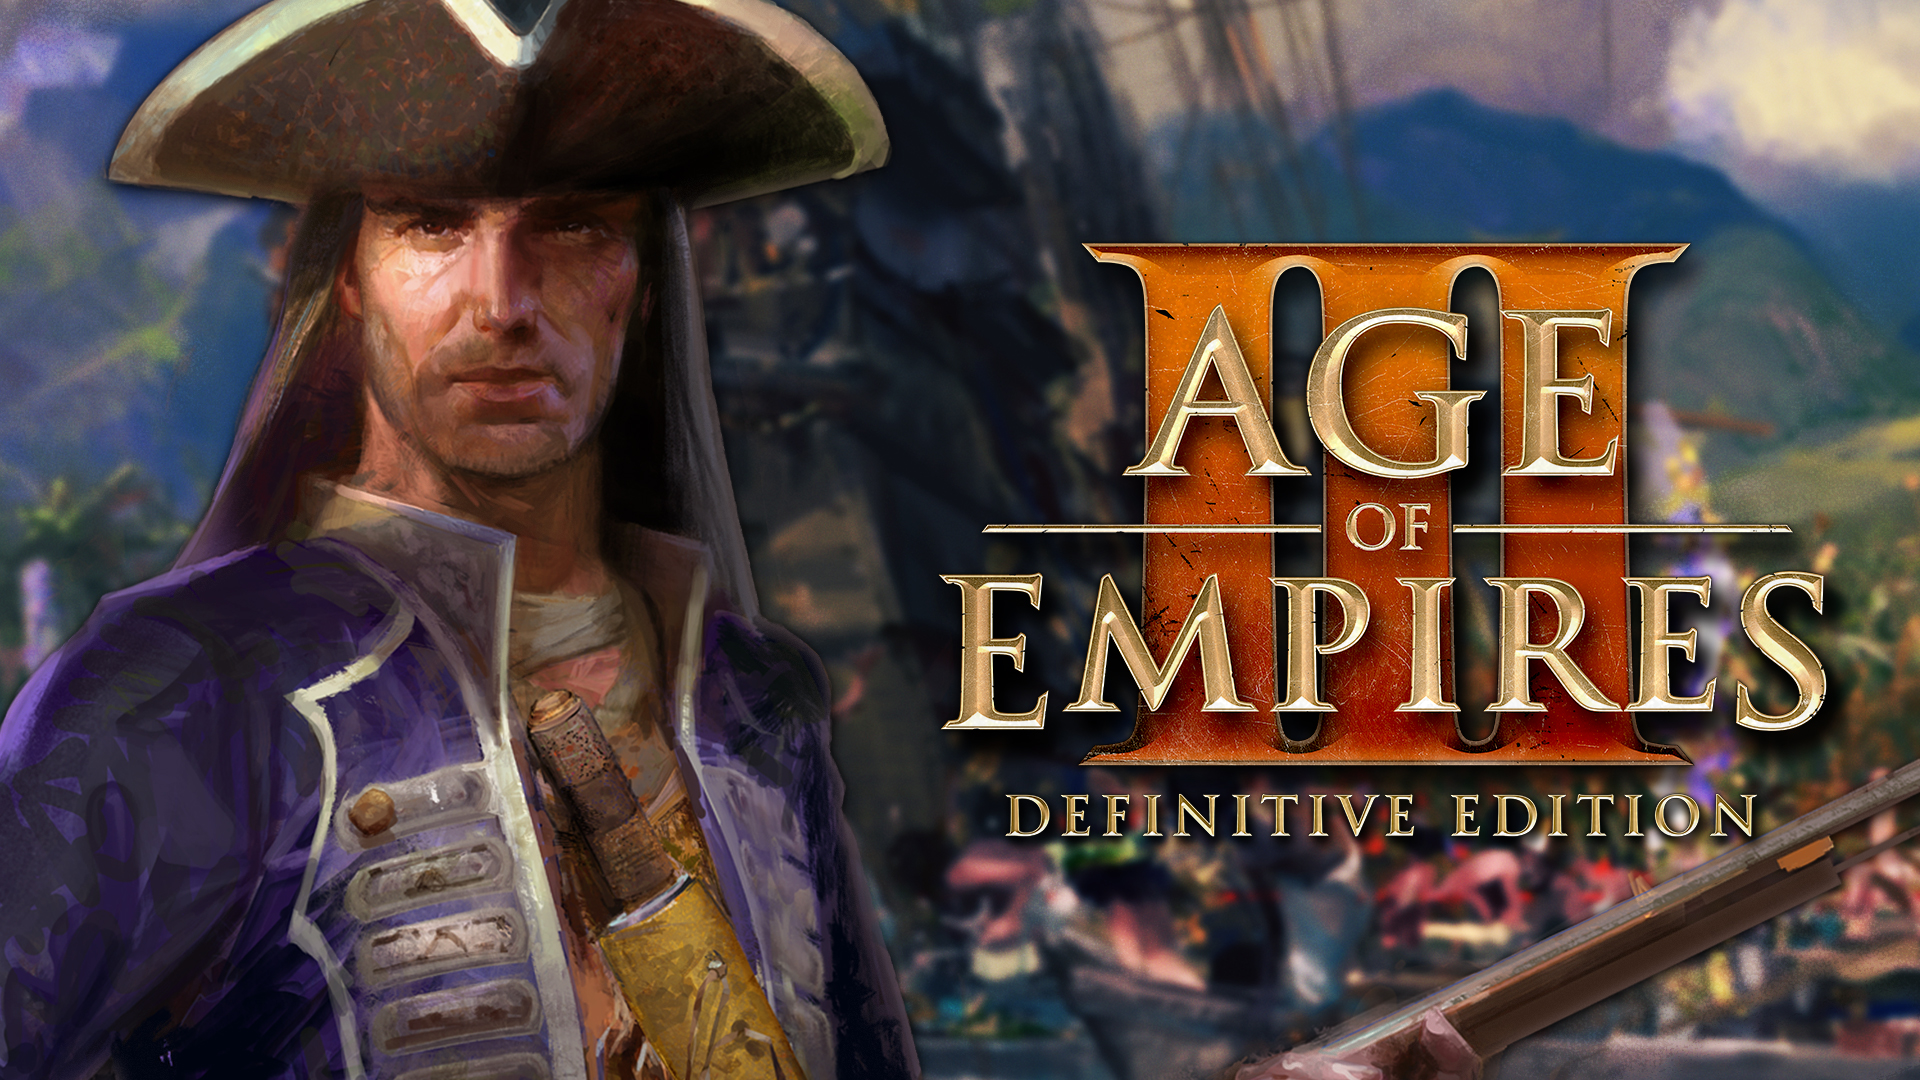 age of empires definitive edition xbox